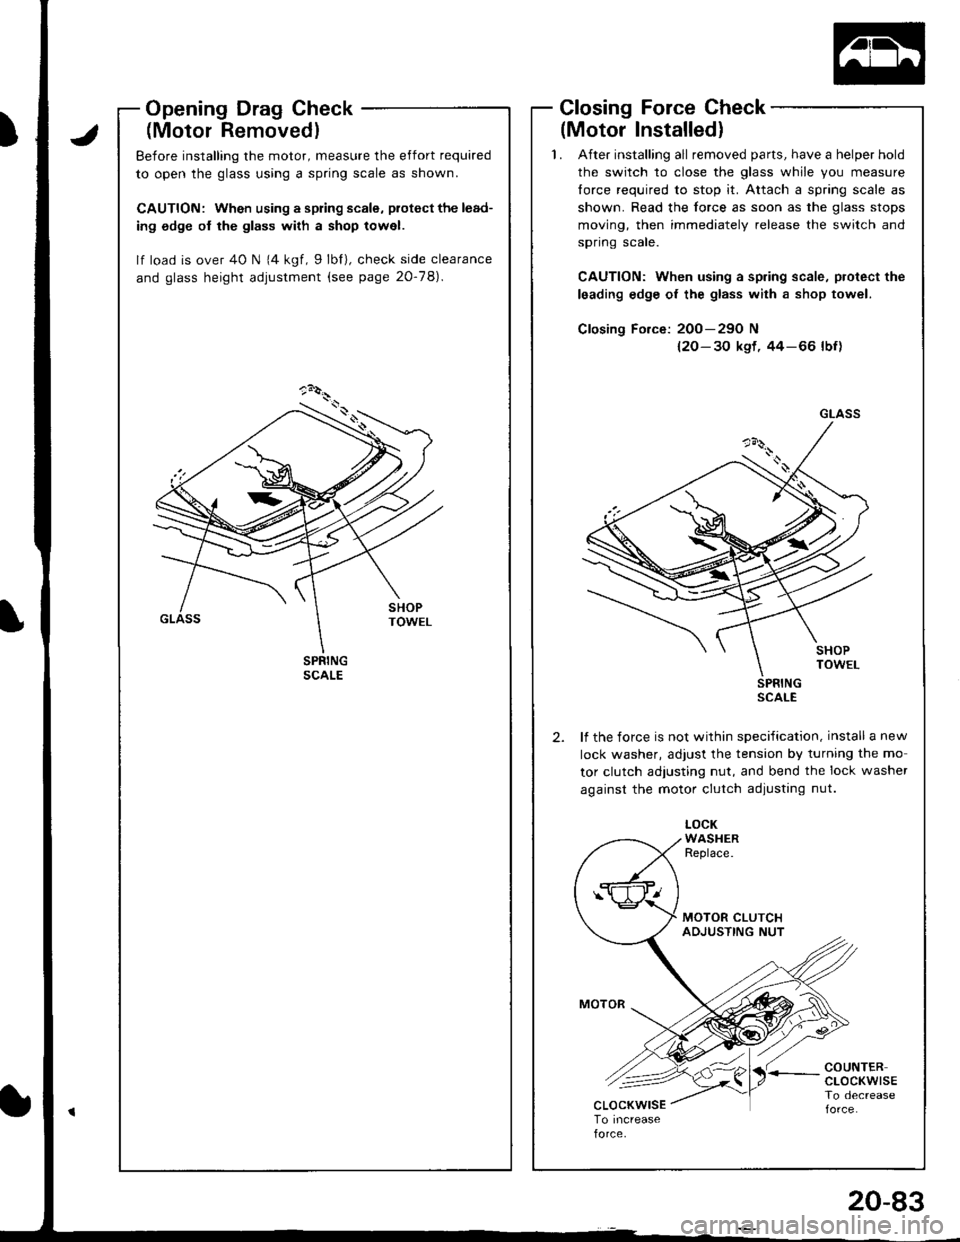 HONDA INTEGRA 1998 4.G Workshop Manual OpeningDragGheck
(Motor Removedl
Before installing the motor, measure the effort required
to open the glass using a spring scale as shown.
CAUTION: Wh€n using a spring scale, piotect the lead-
ing o